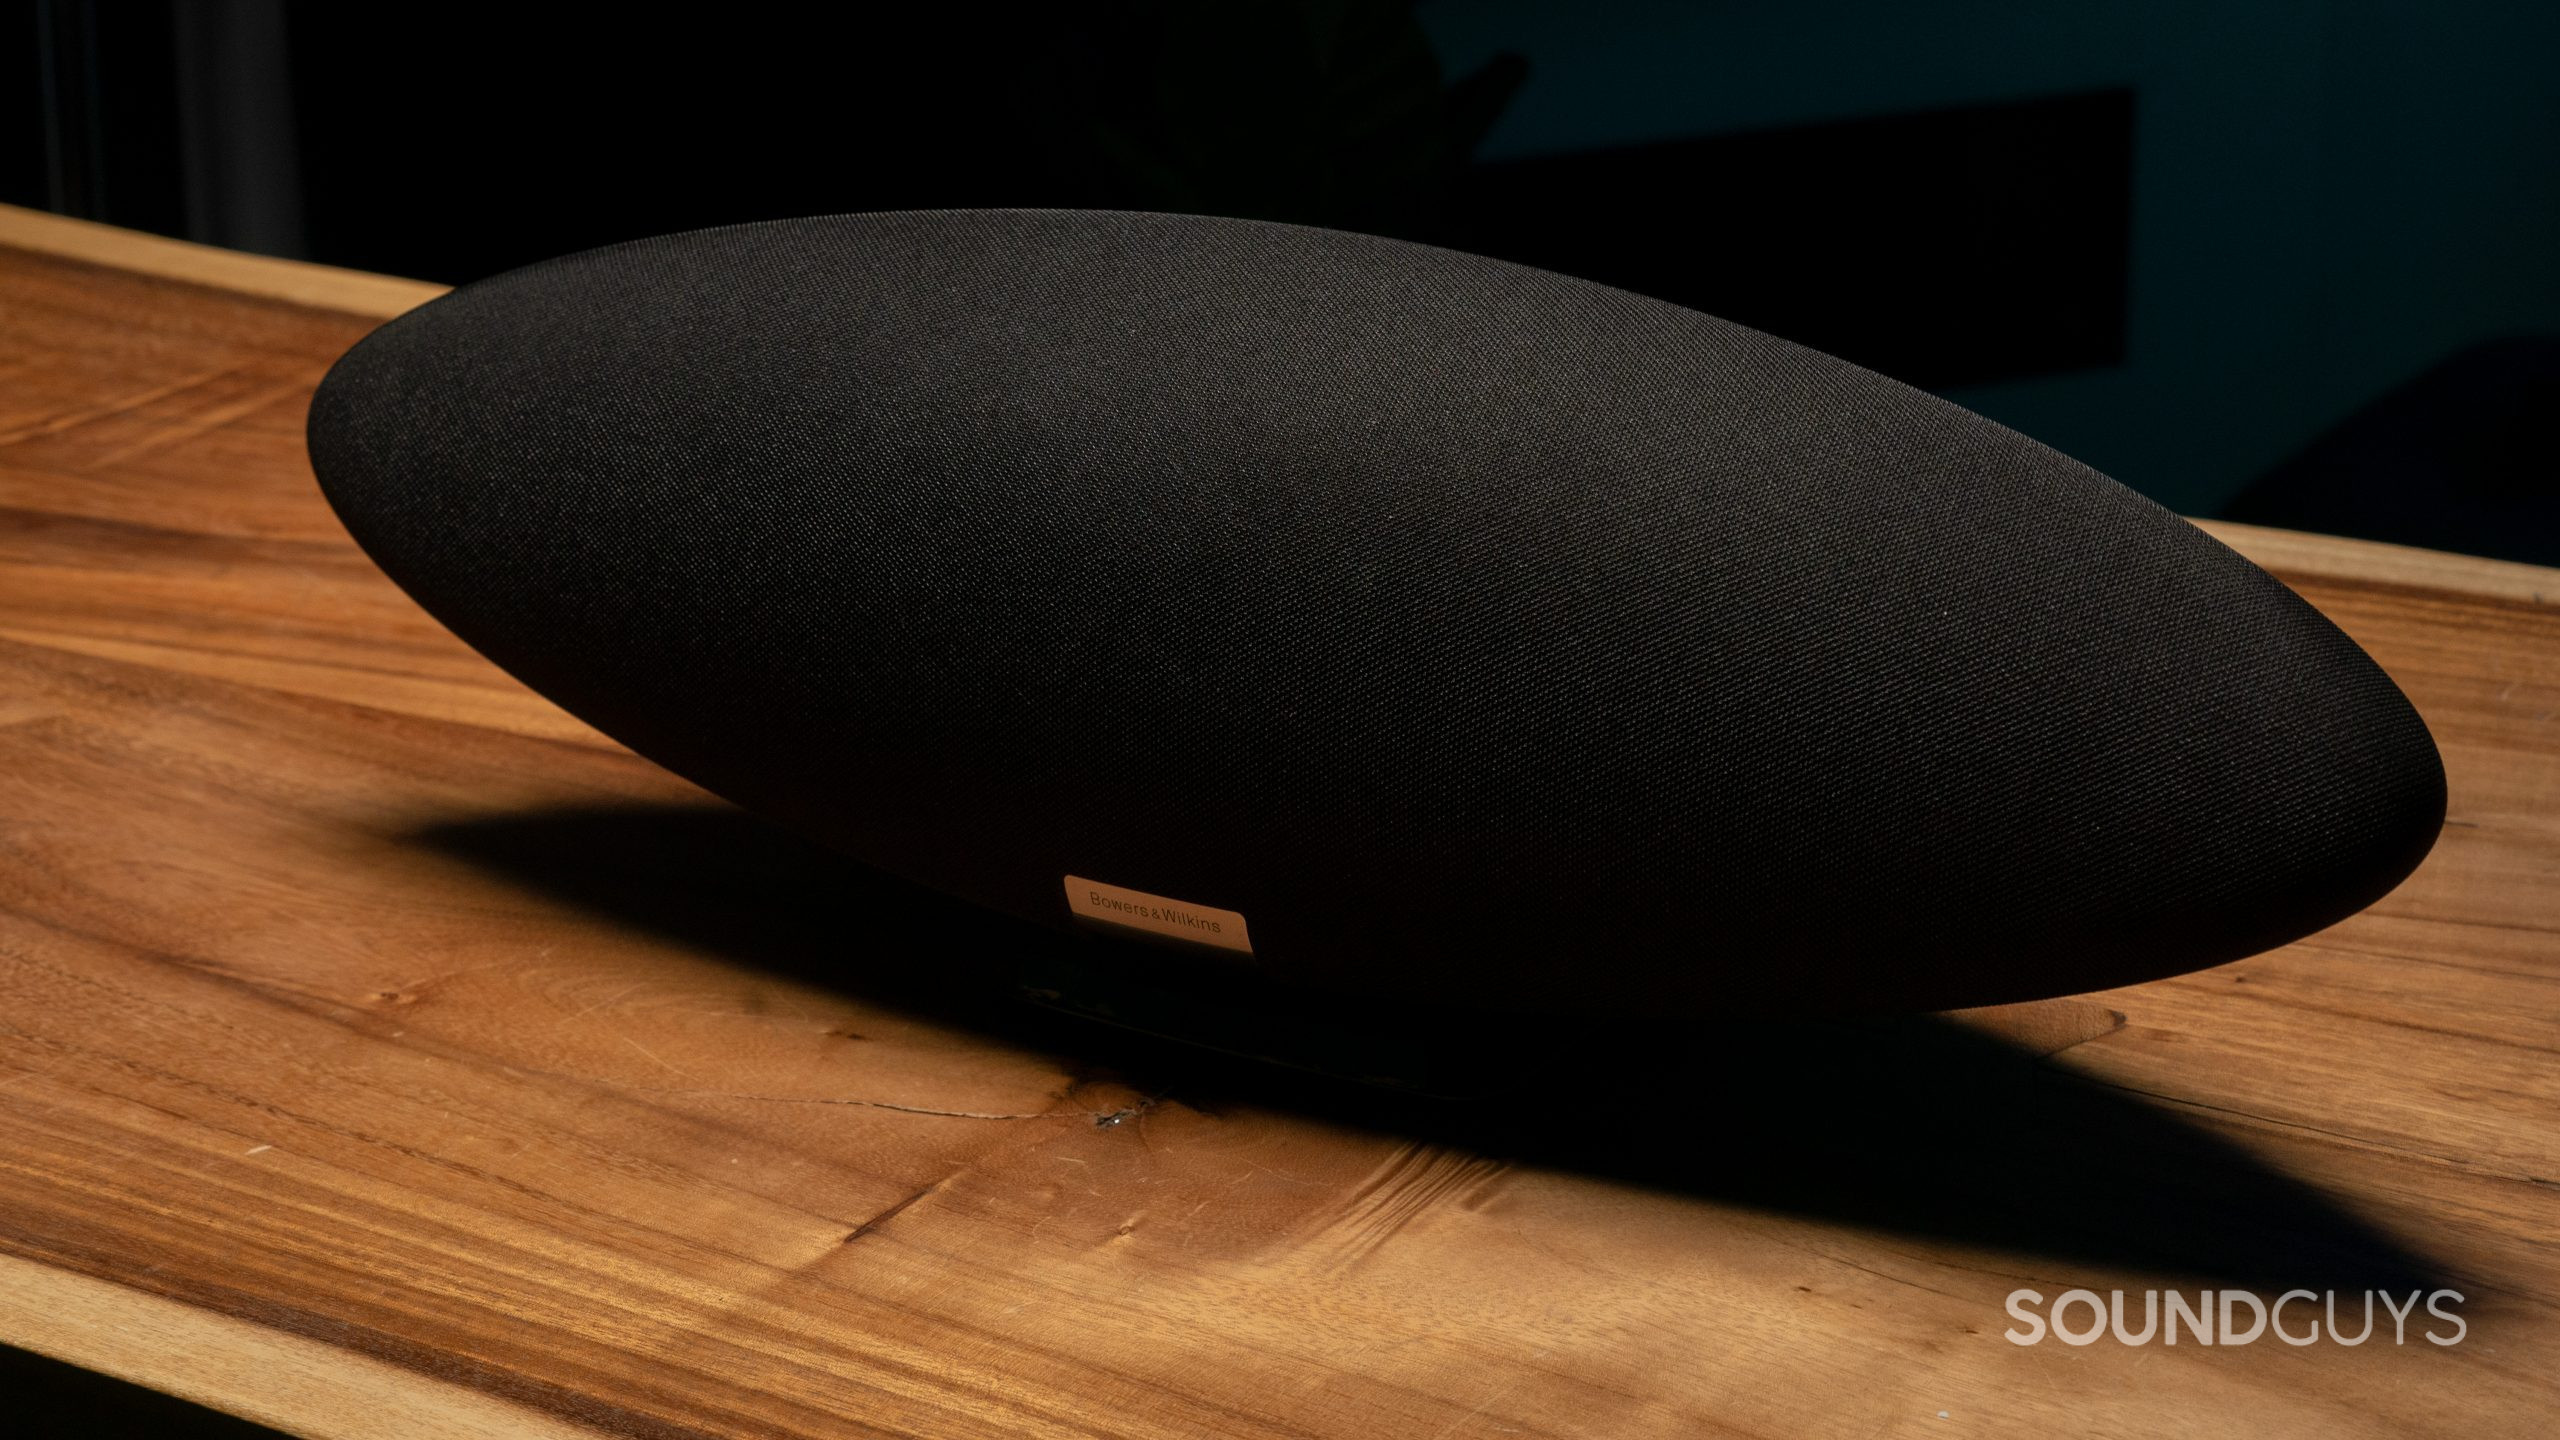 A black Bowers &amp; Wilkins Zeppelin speaker shown at an angle fron the front on a wooden table.